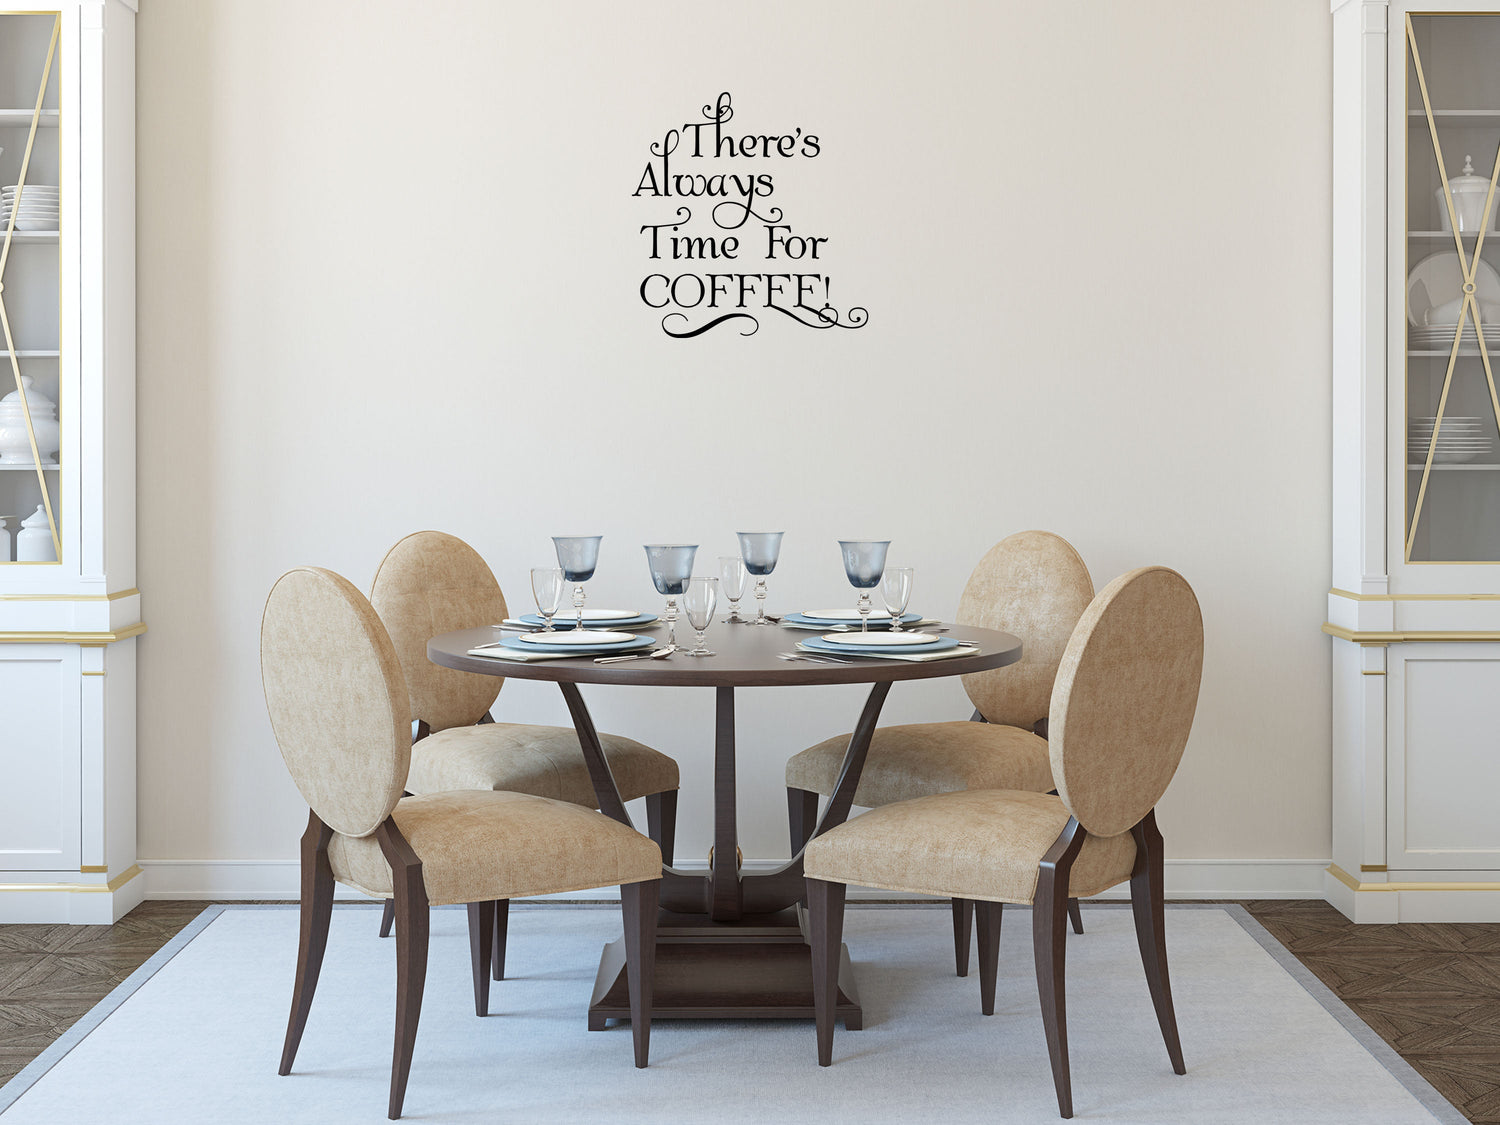 There's Always Time For Coffee Vinyl Wall Decal Inspirational Wall Signs 